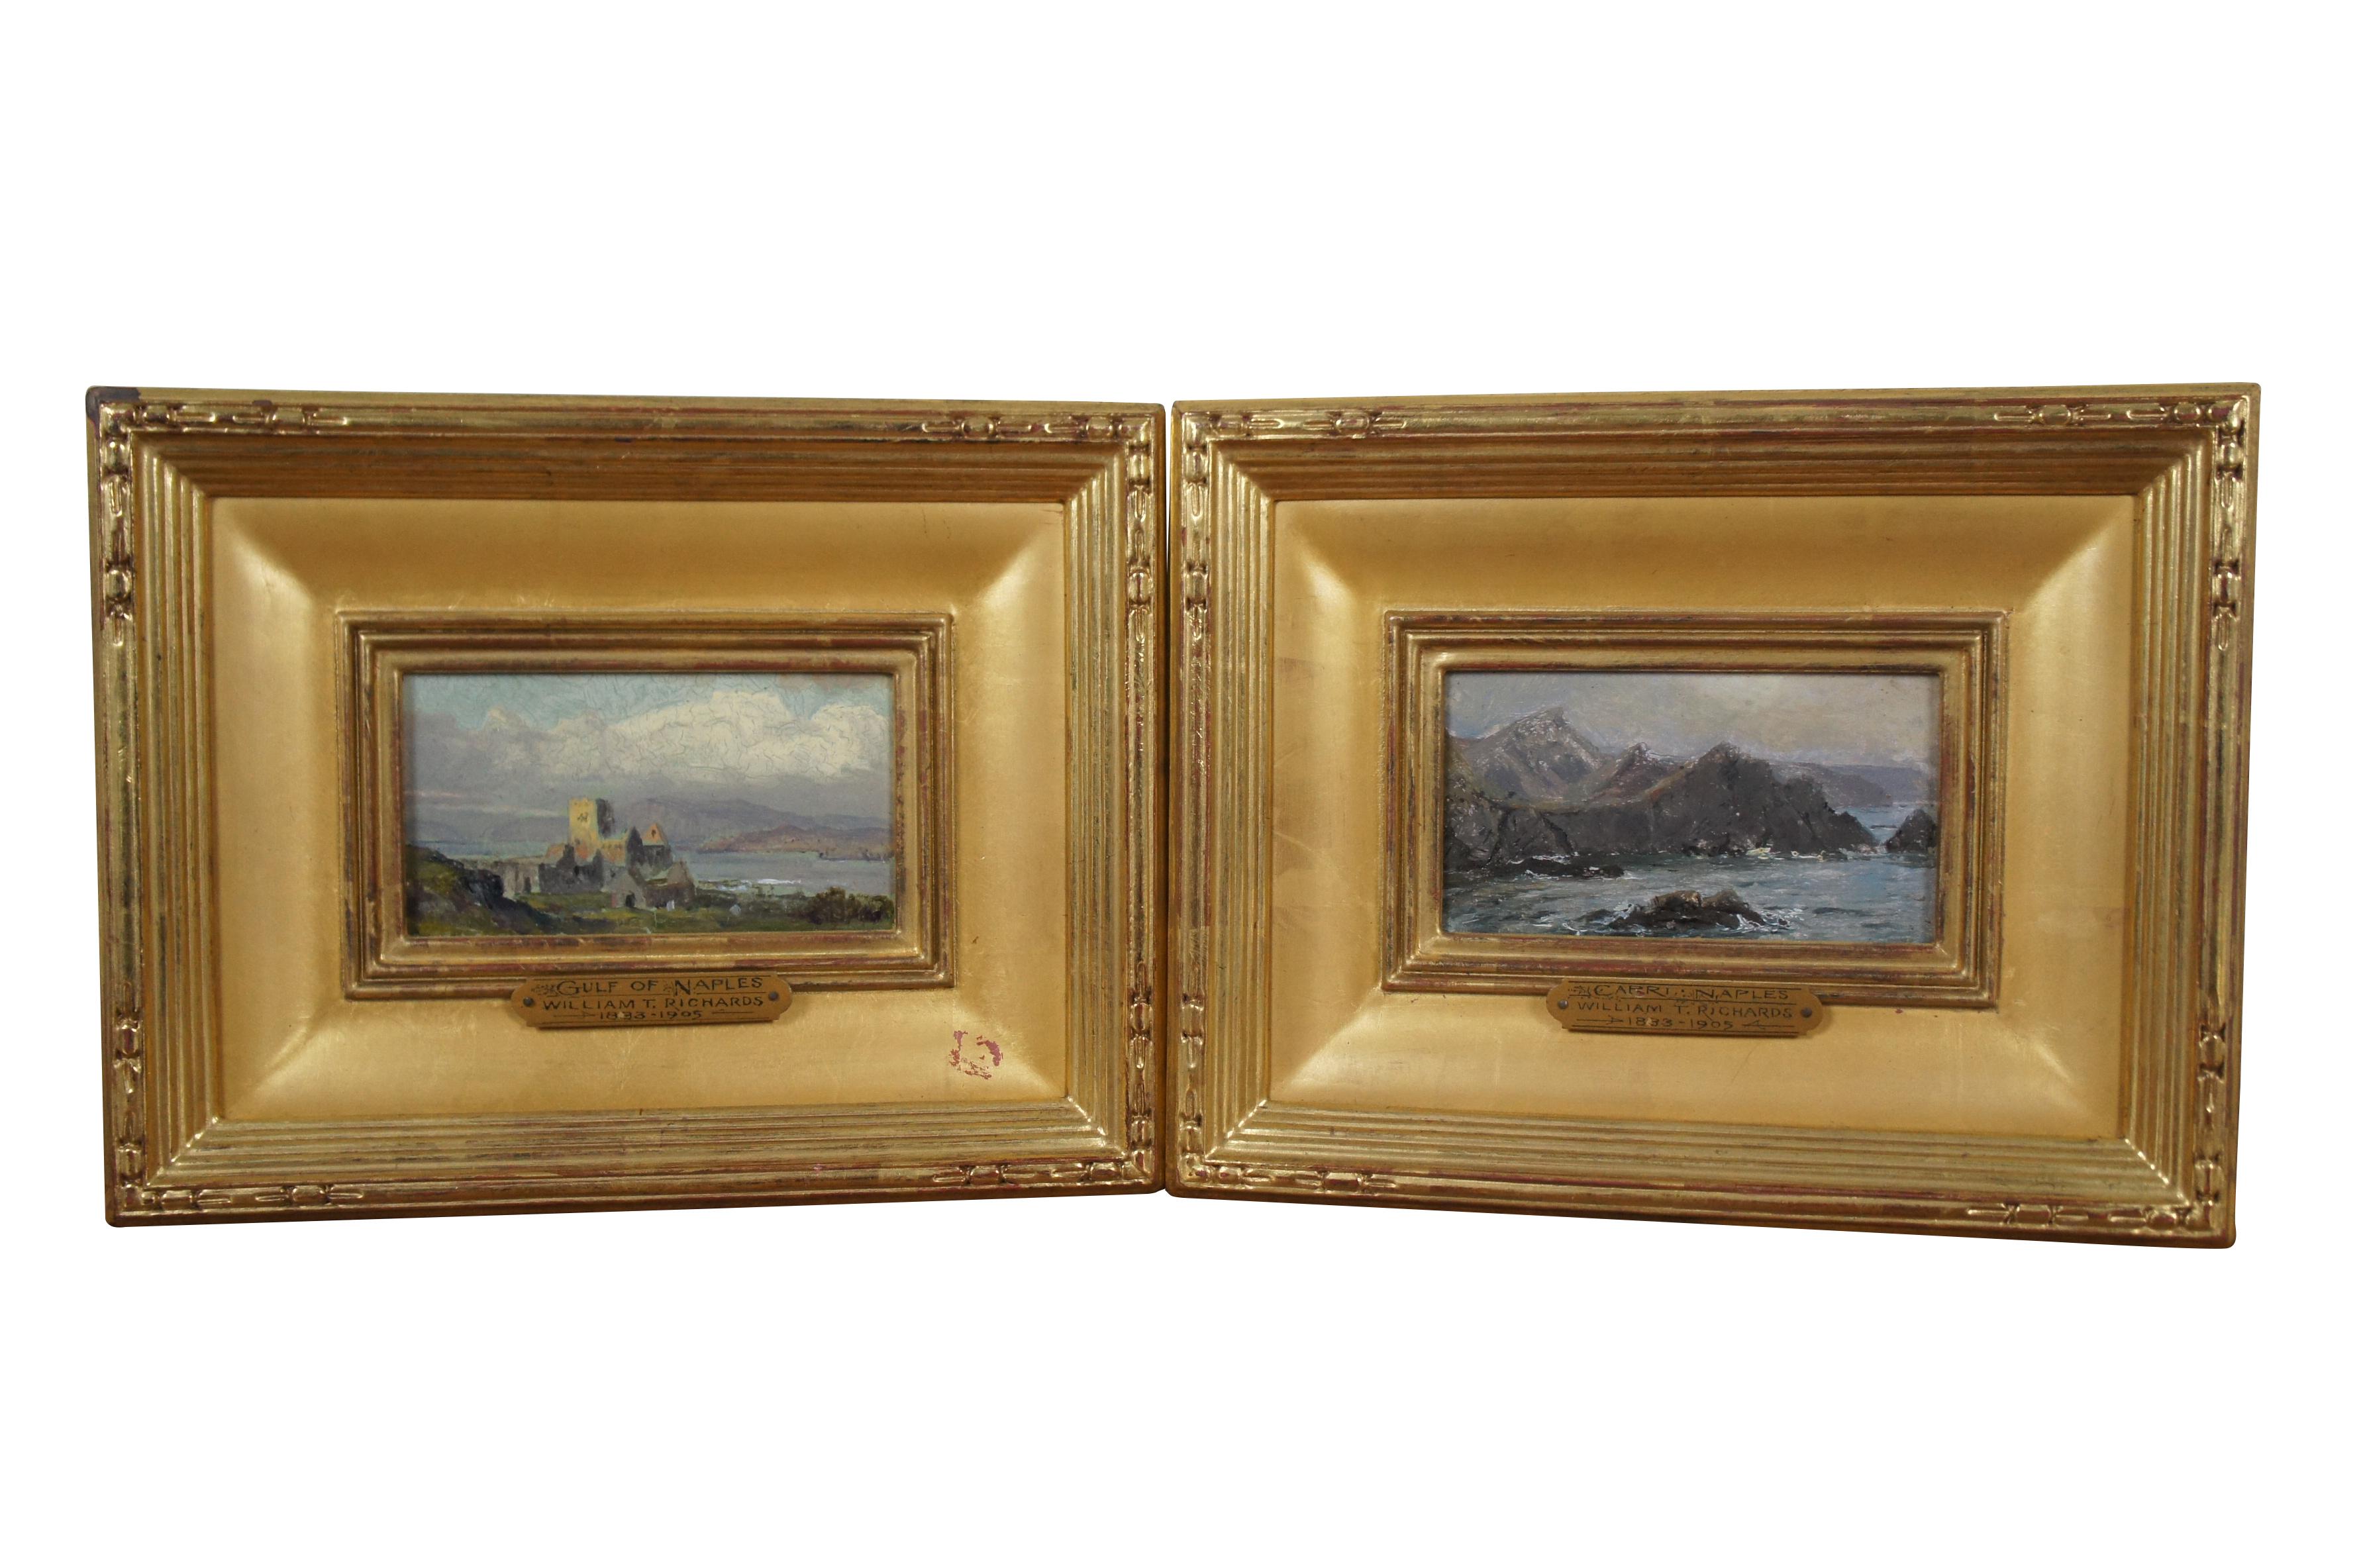 3 antique oil on board miniature seascape paintings by William Trost Richards, depicting rocky, seaside cliffs / hills (Capri, Naples); a rocky beach (Near Hartland Point); and the ruins of a castle in a hilly landscape (Gulf of Naples). Wide,